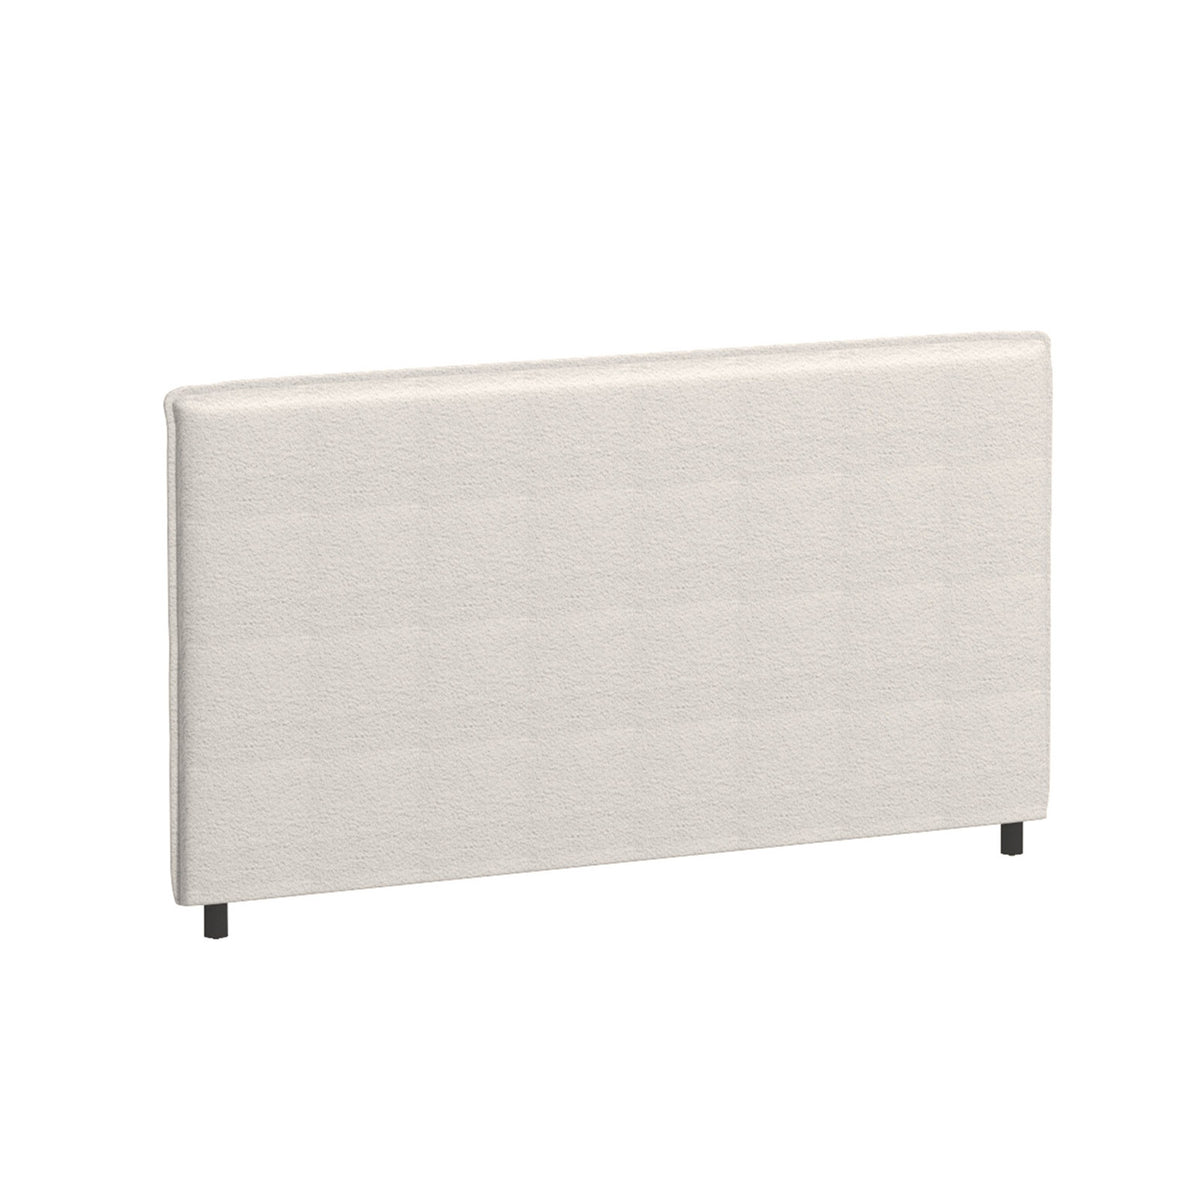 Milano Decor Gia Boucle Bedhead Headboard Upholstered Luxury Cushioned White - Queen - White